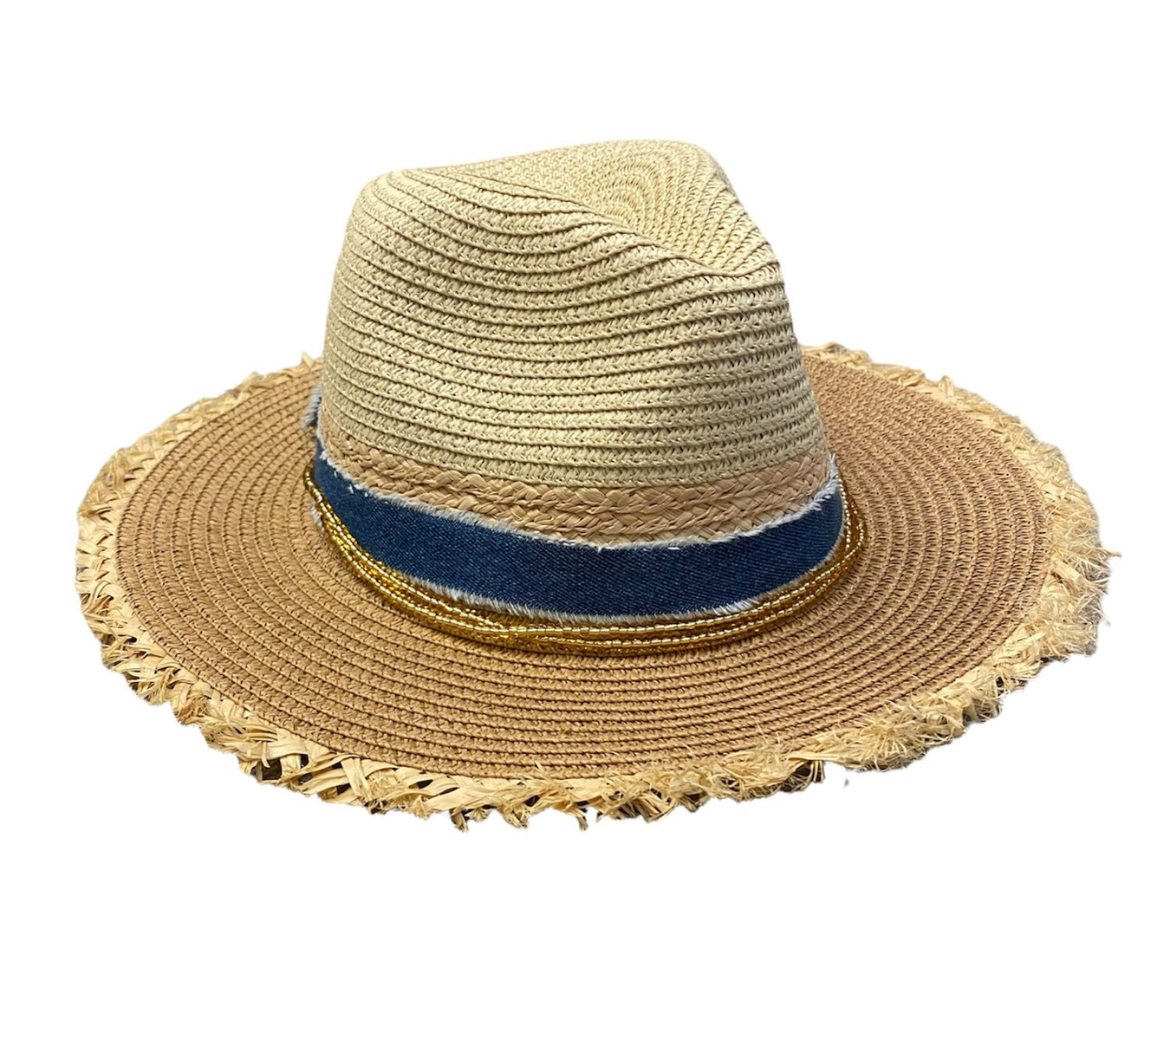 How to Accessorize A Straw Hat